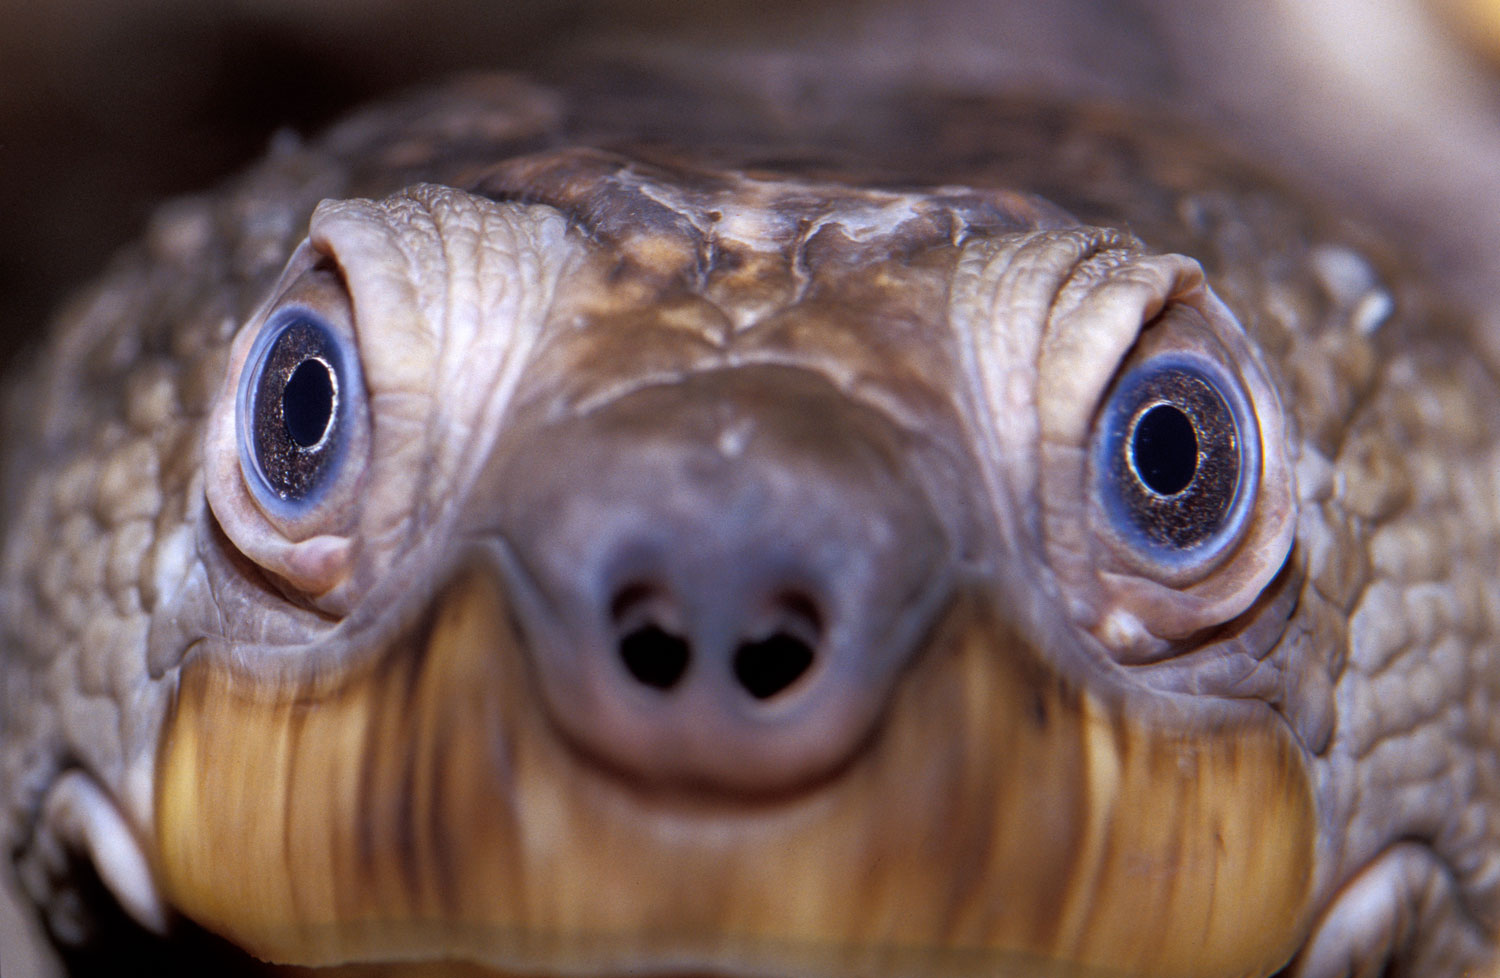 The Mary River turtle